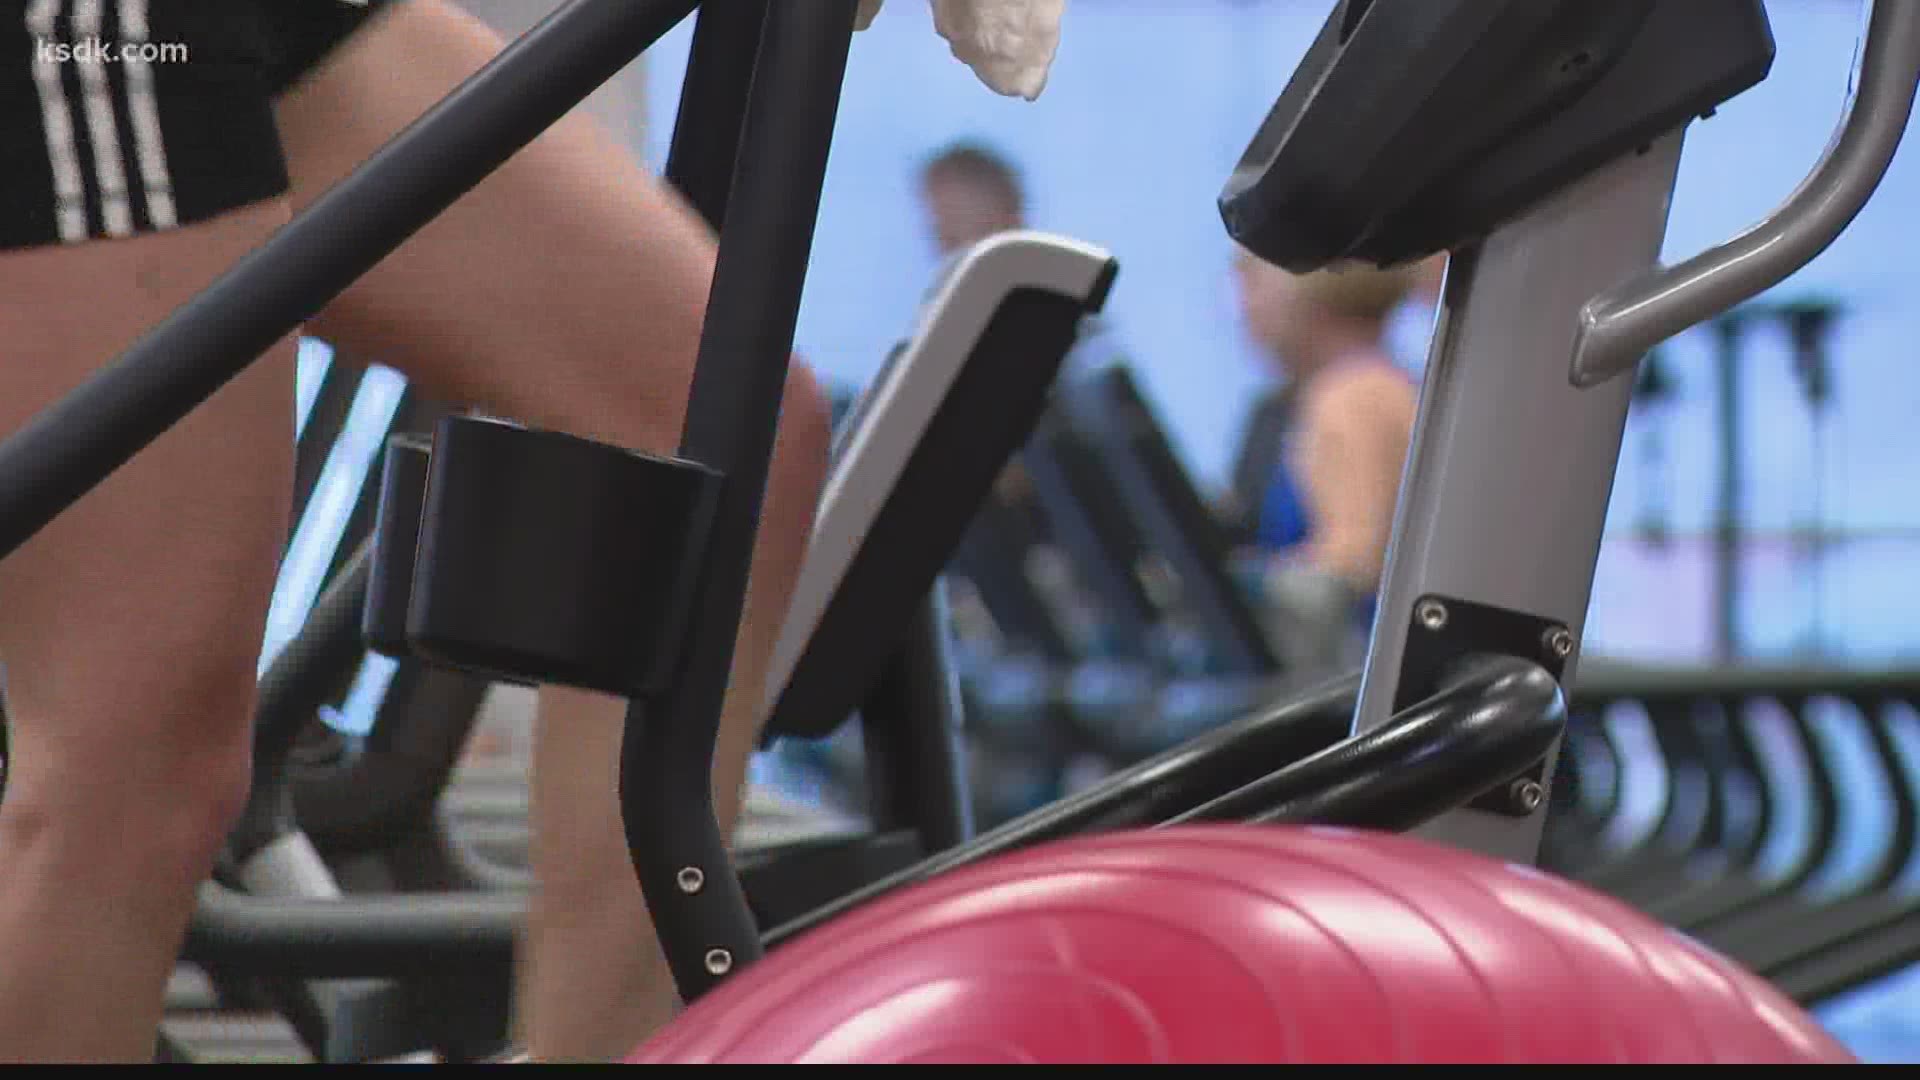 Gyms will be able to open with restrictions on June 15.